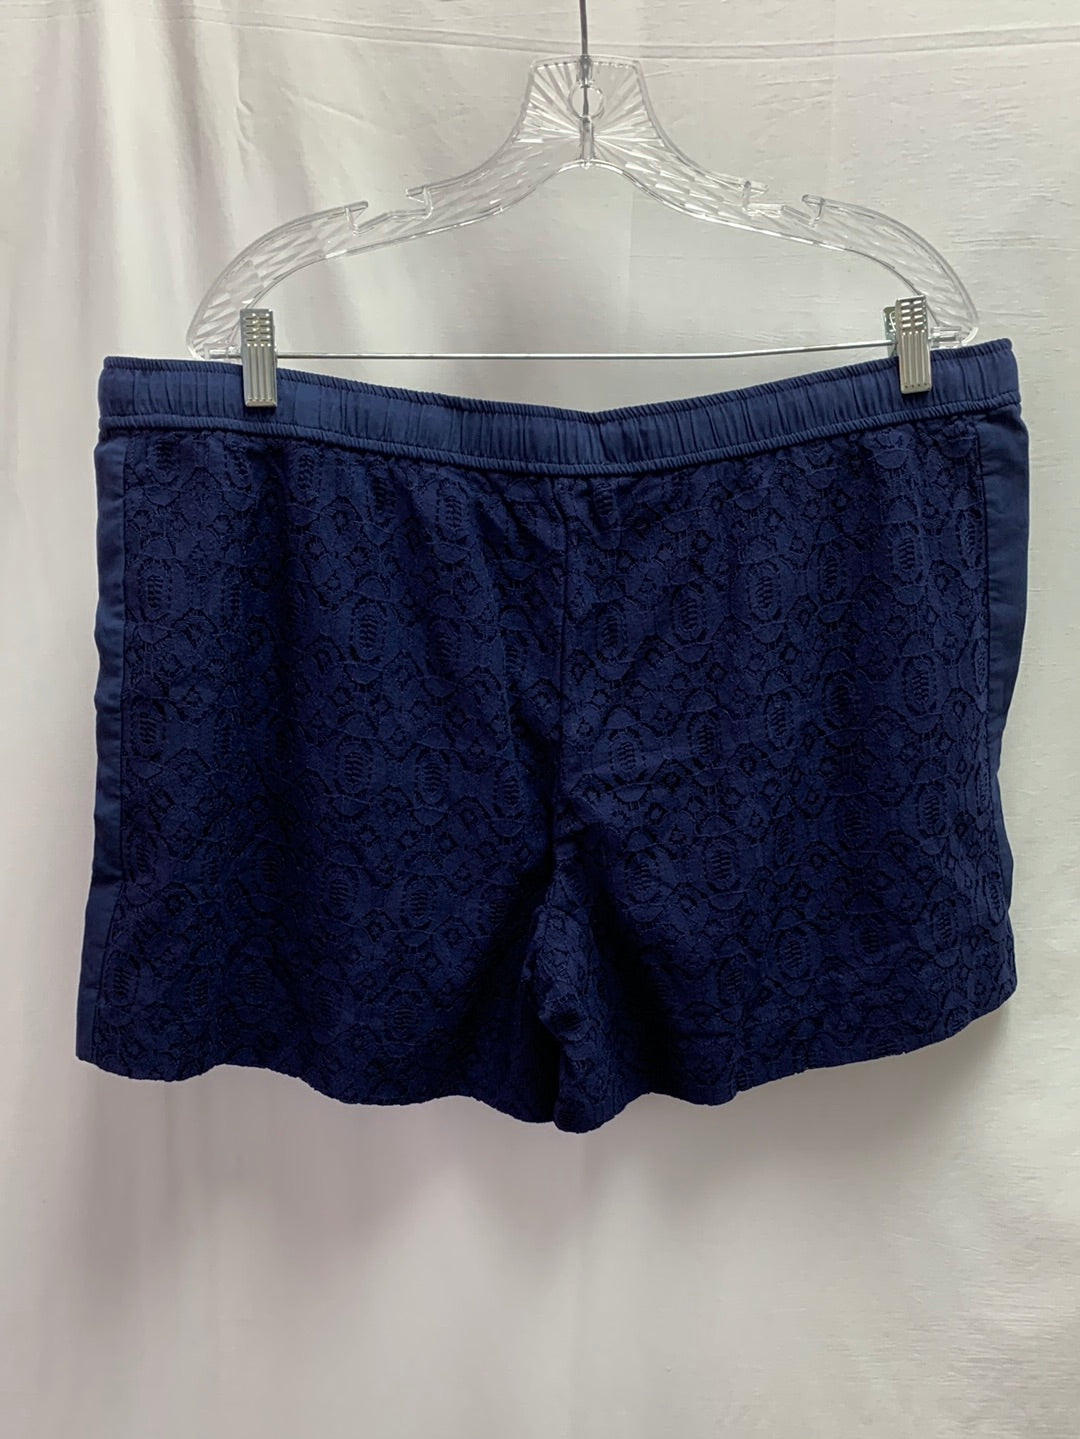 NWT - ABS BY ALLEN SCHWARTZ navy lace Shorts - Size X-Large